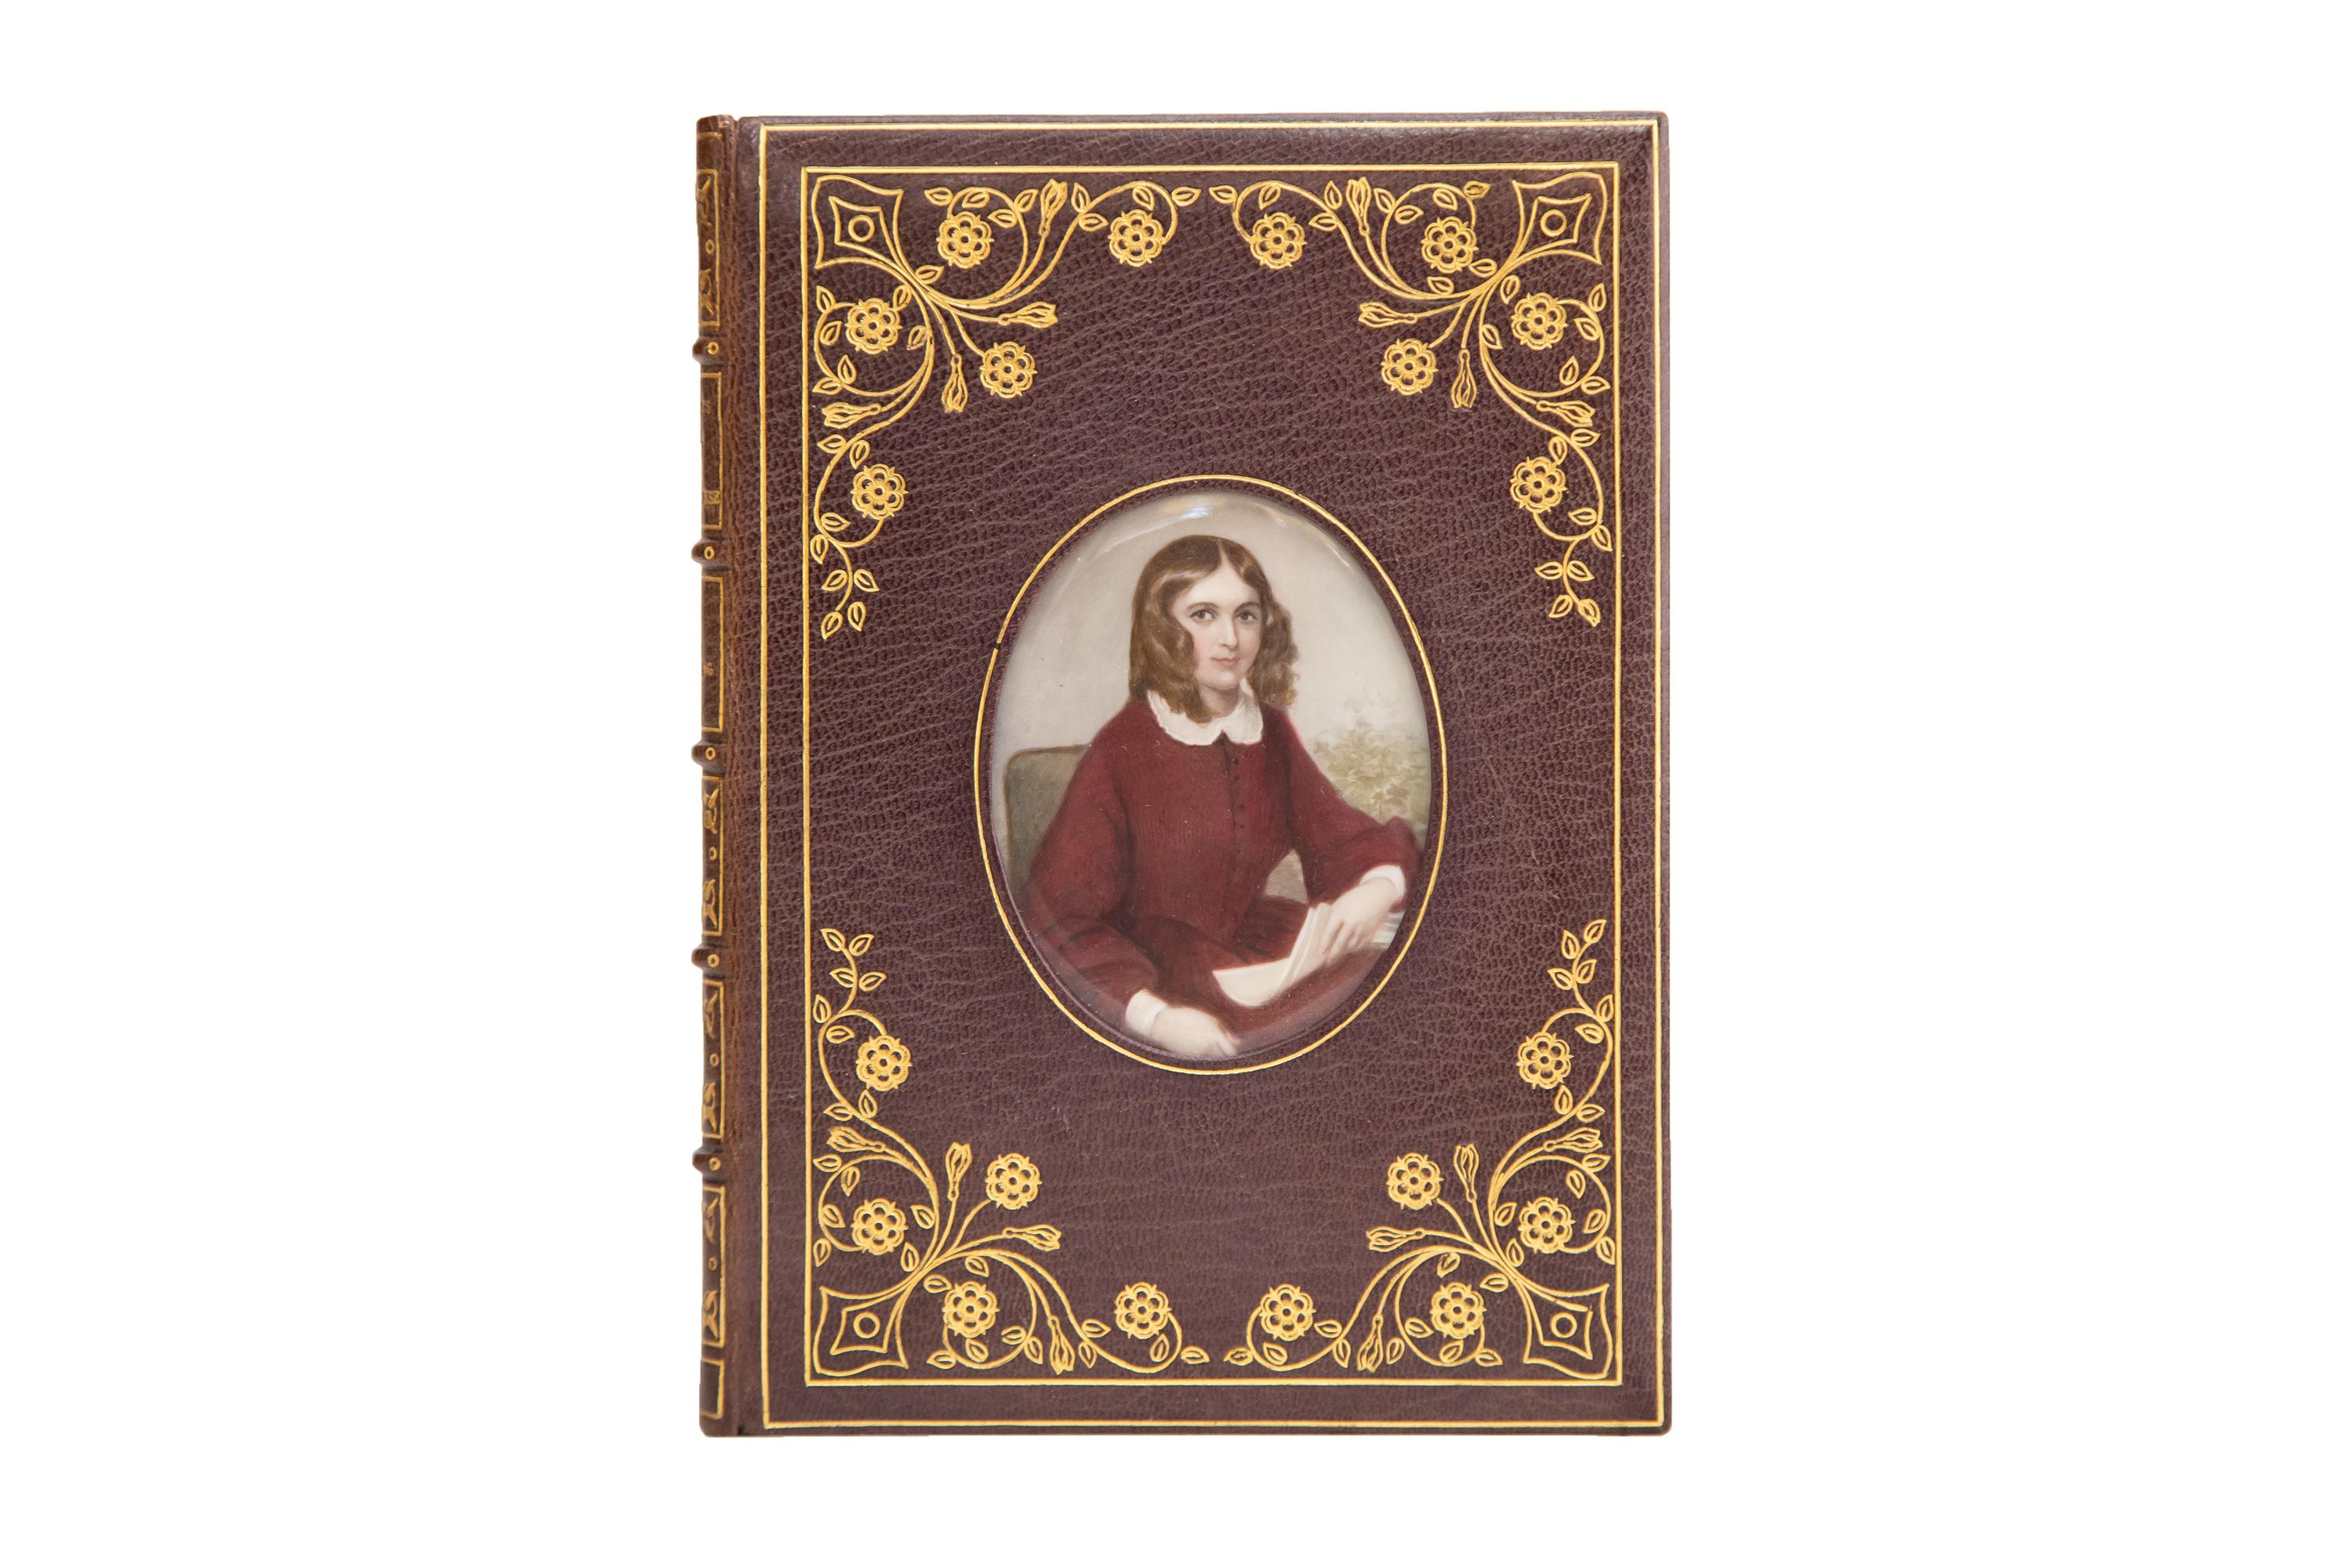 1 Volume. Elizabeth Barrett Browning, Sonnets from the Portuguese. A lovely Cosway-style binding by Bayntun in full purple morocco with the upper cover set with a hand-painted portrait of Browning under glass, bordered in gilt. Both the front and